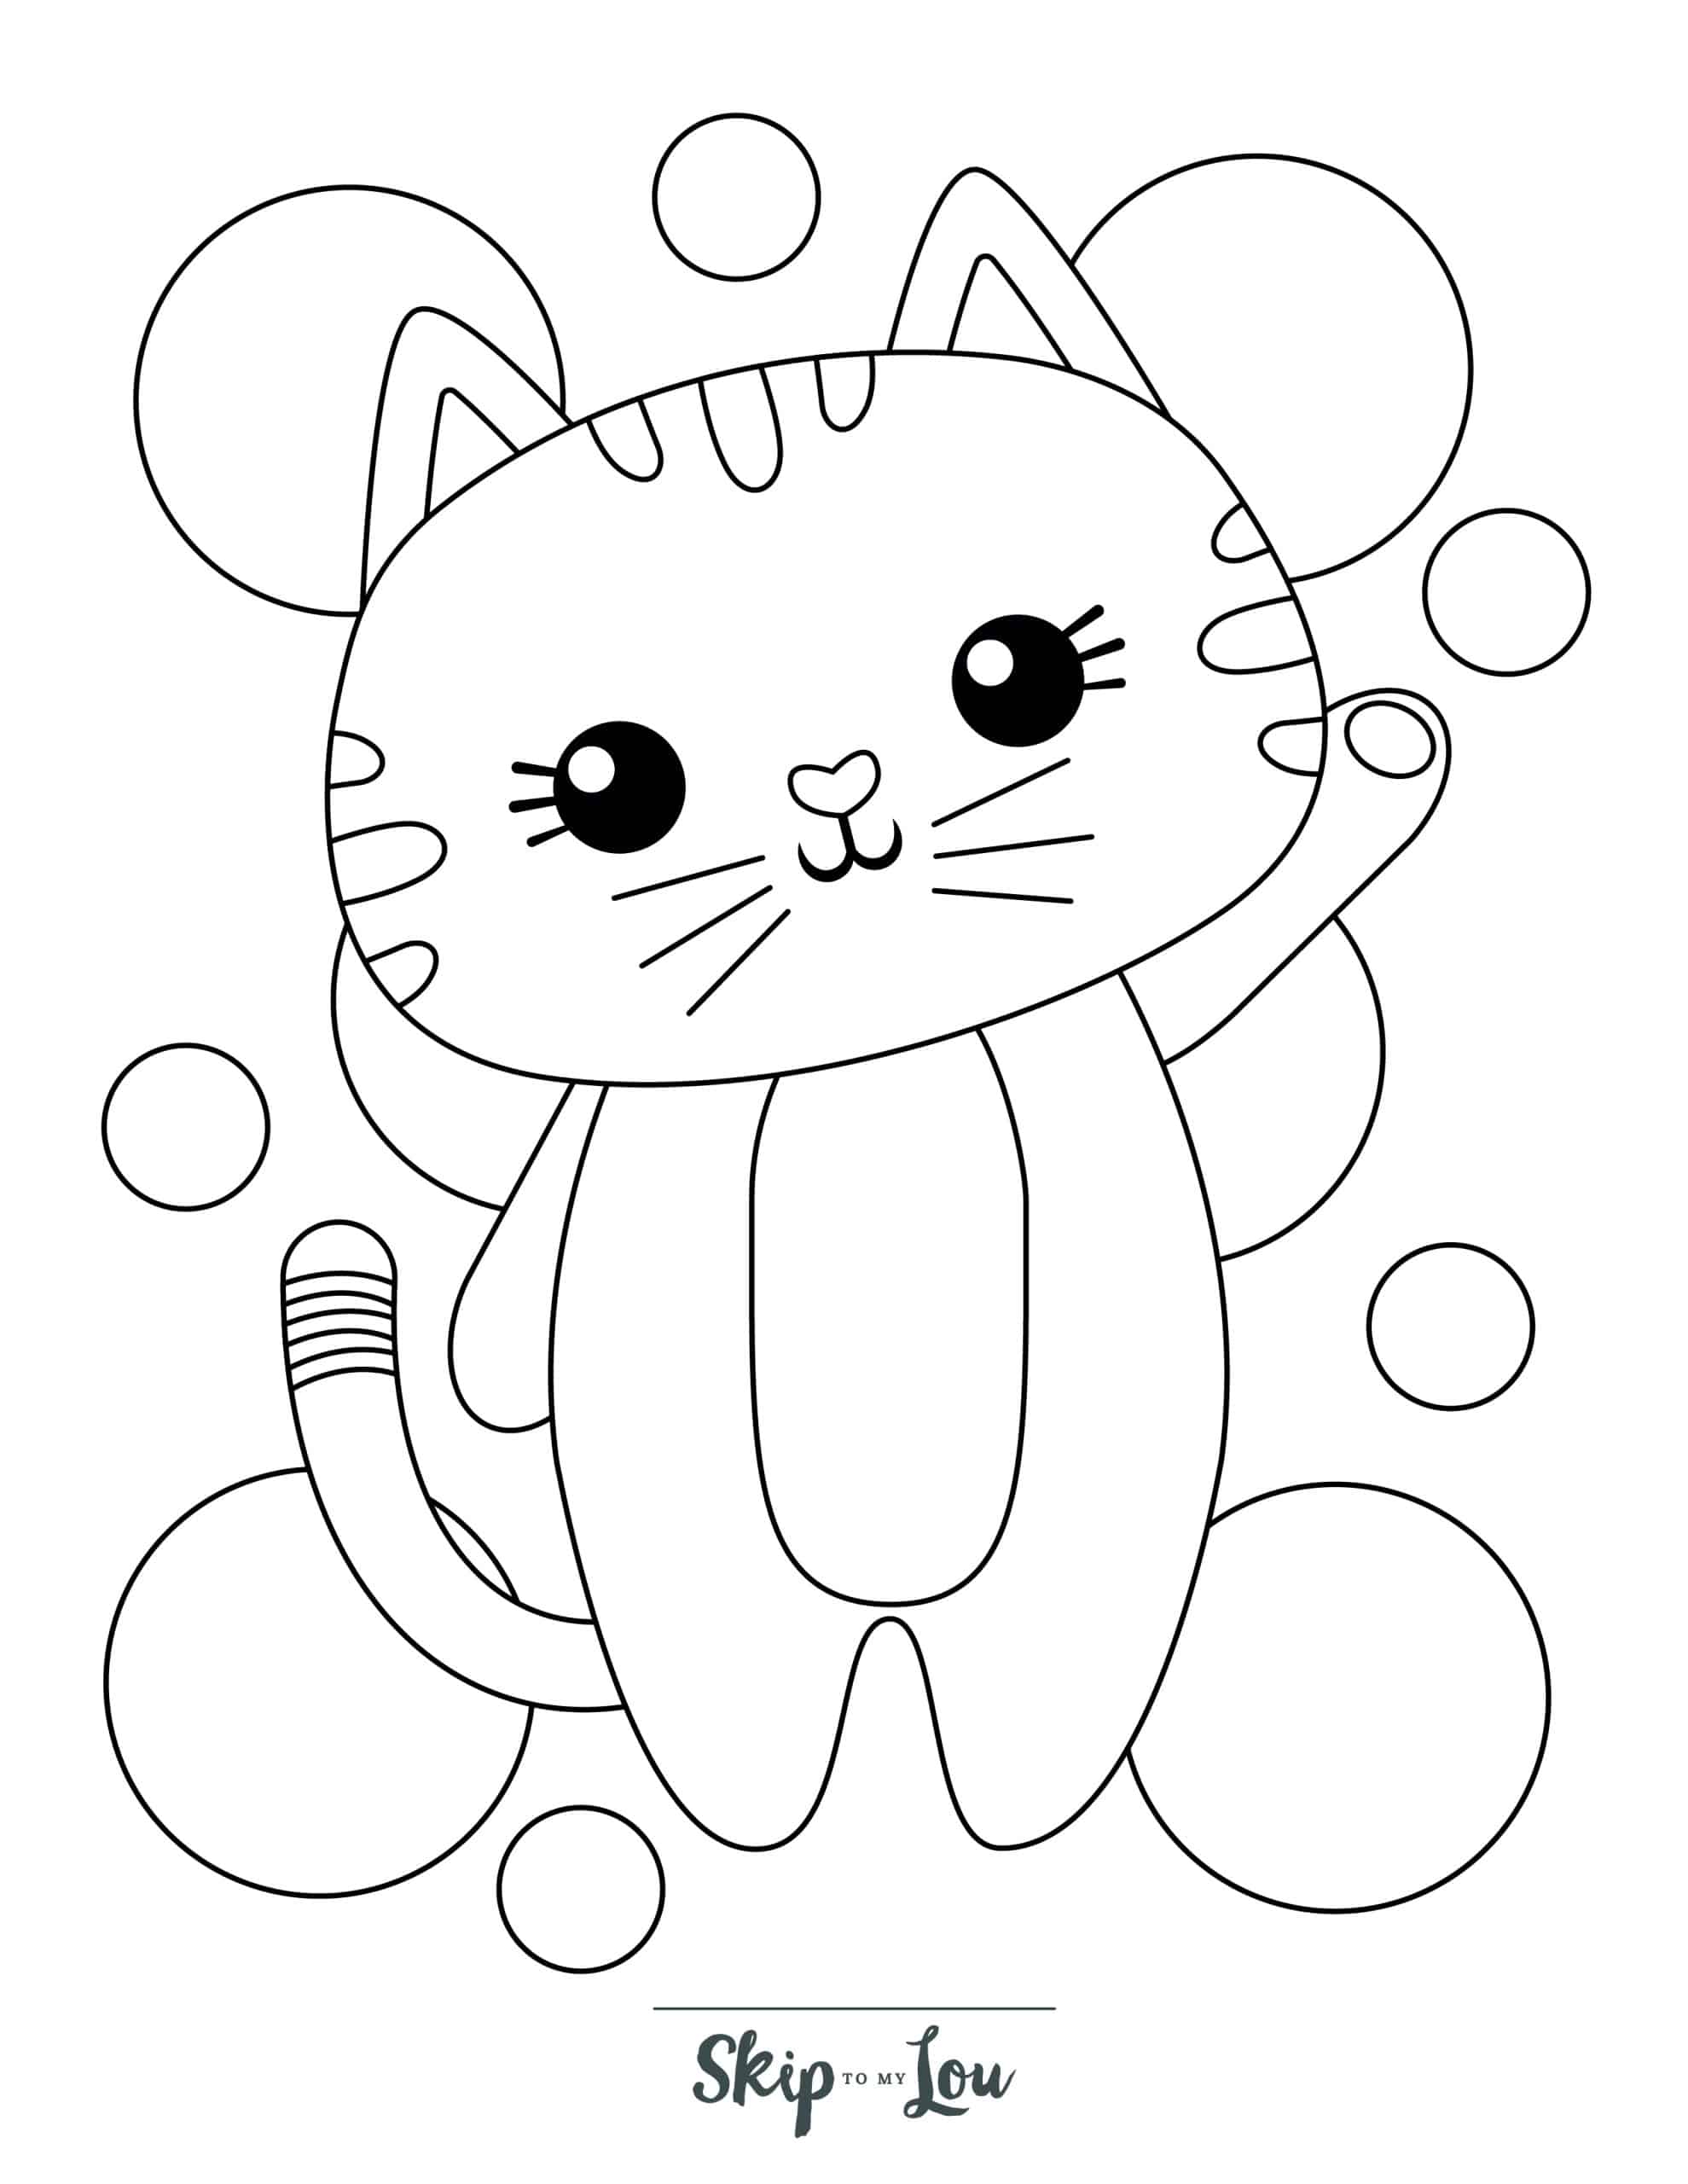 Free printable kitten coloring pages for kids skip to my lou